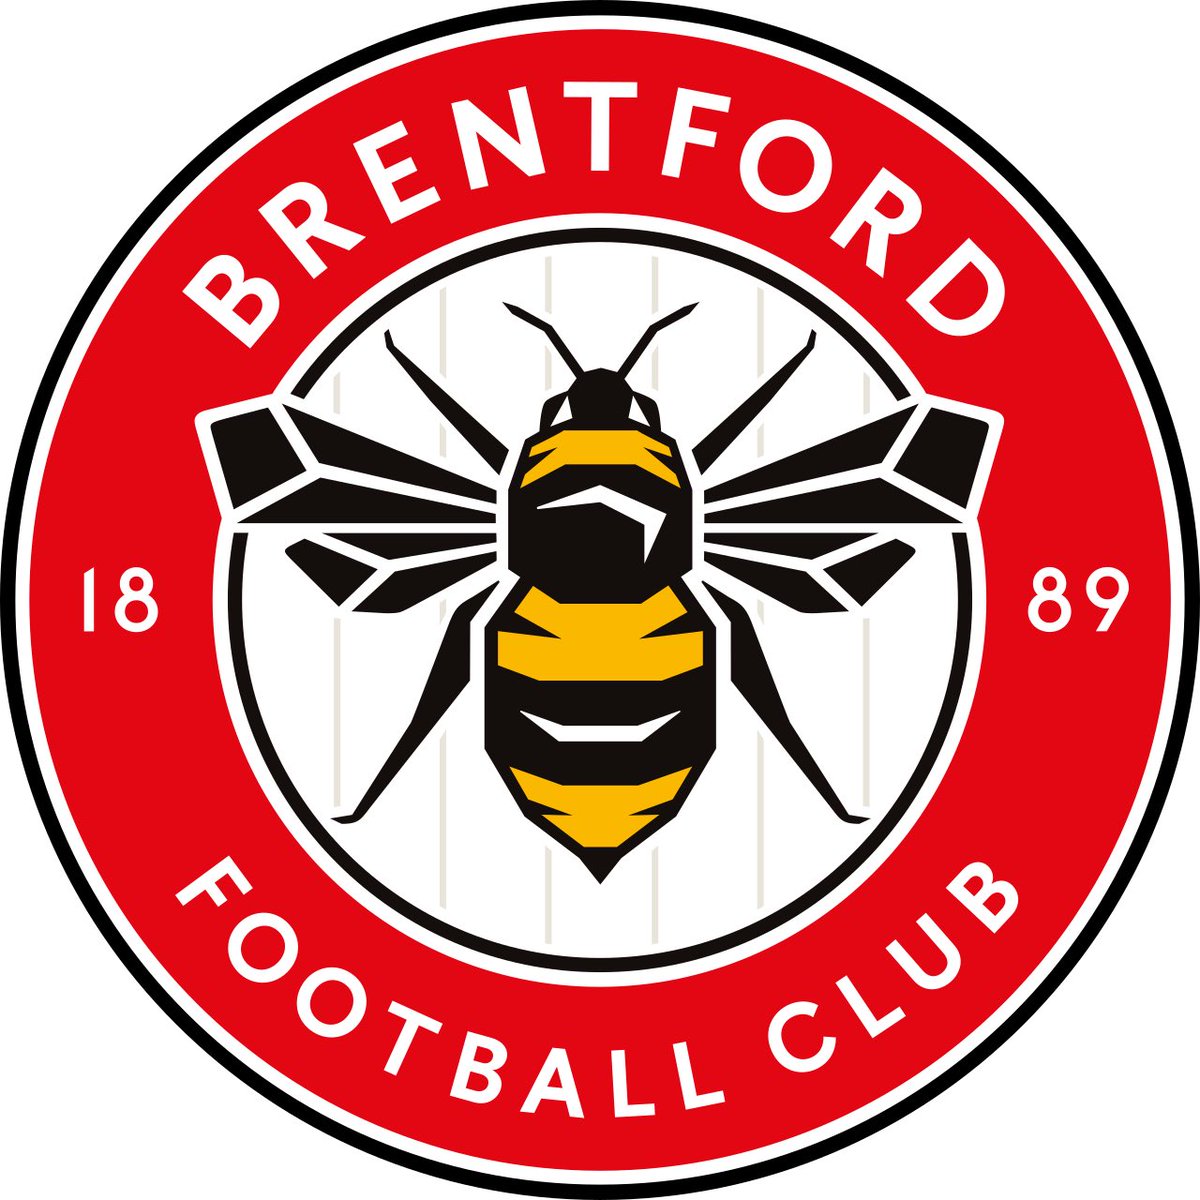 Brentford (A) now on sale to ST holders with 120+ Loyalty Points. 124 away supporters tickets remaining. The next points drop will be tomorrow at 2pm. #Newcastle #Brentford #NUFC #BFC